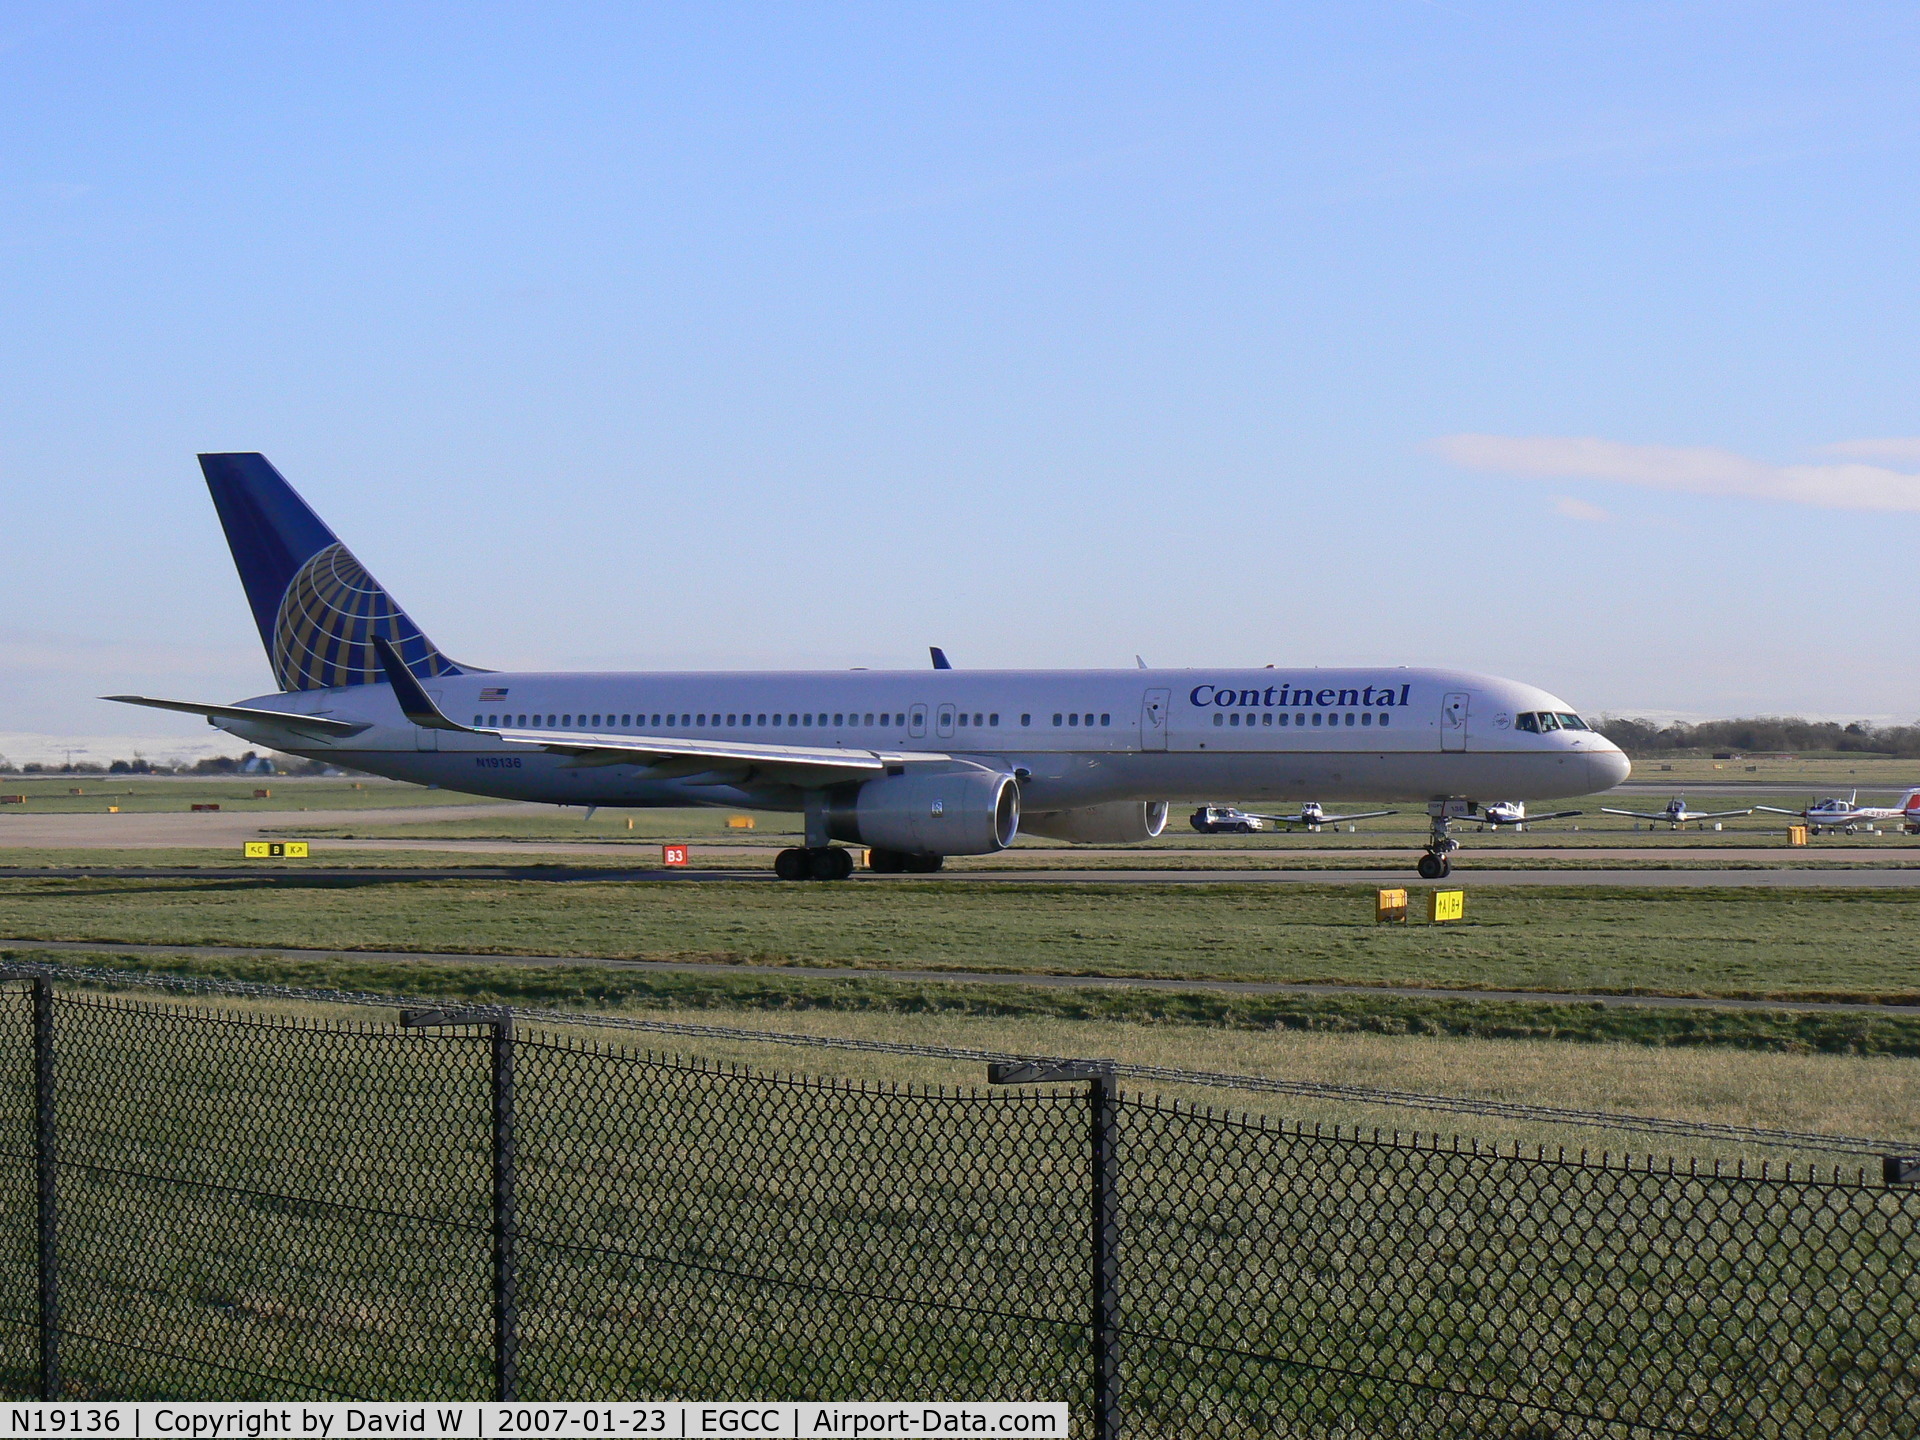 N19136, 1999 Boeing 757-224 C/N 29285, Heading back to the USA